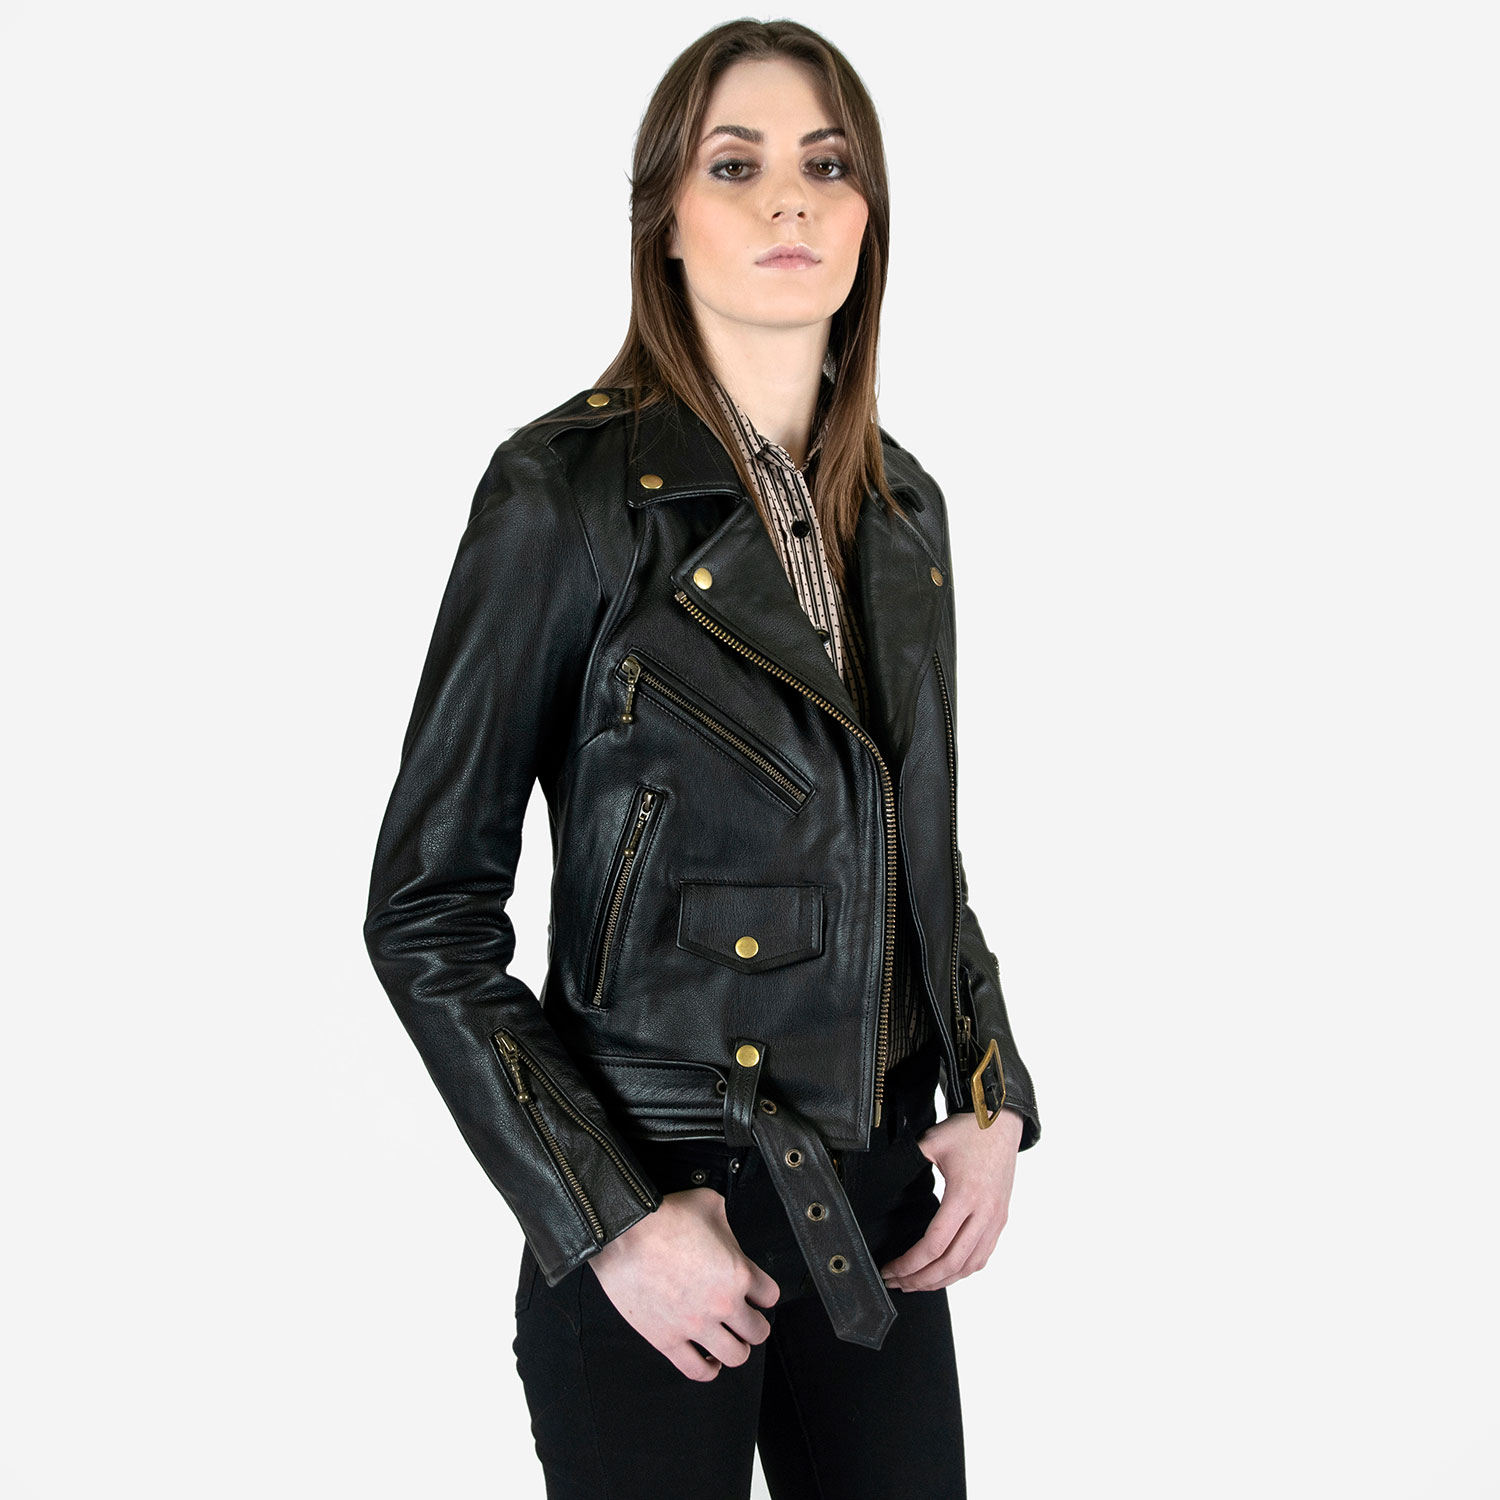 Straight to Hell Men's Commando Leather Jacket